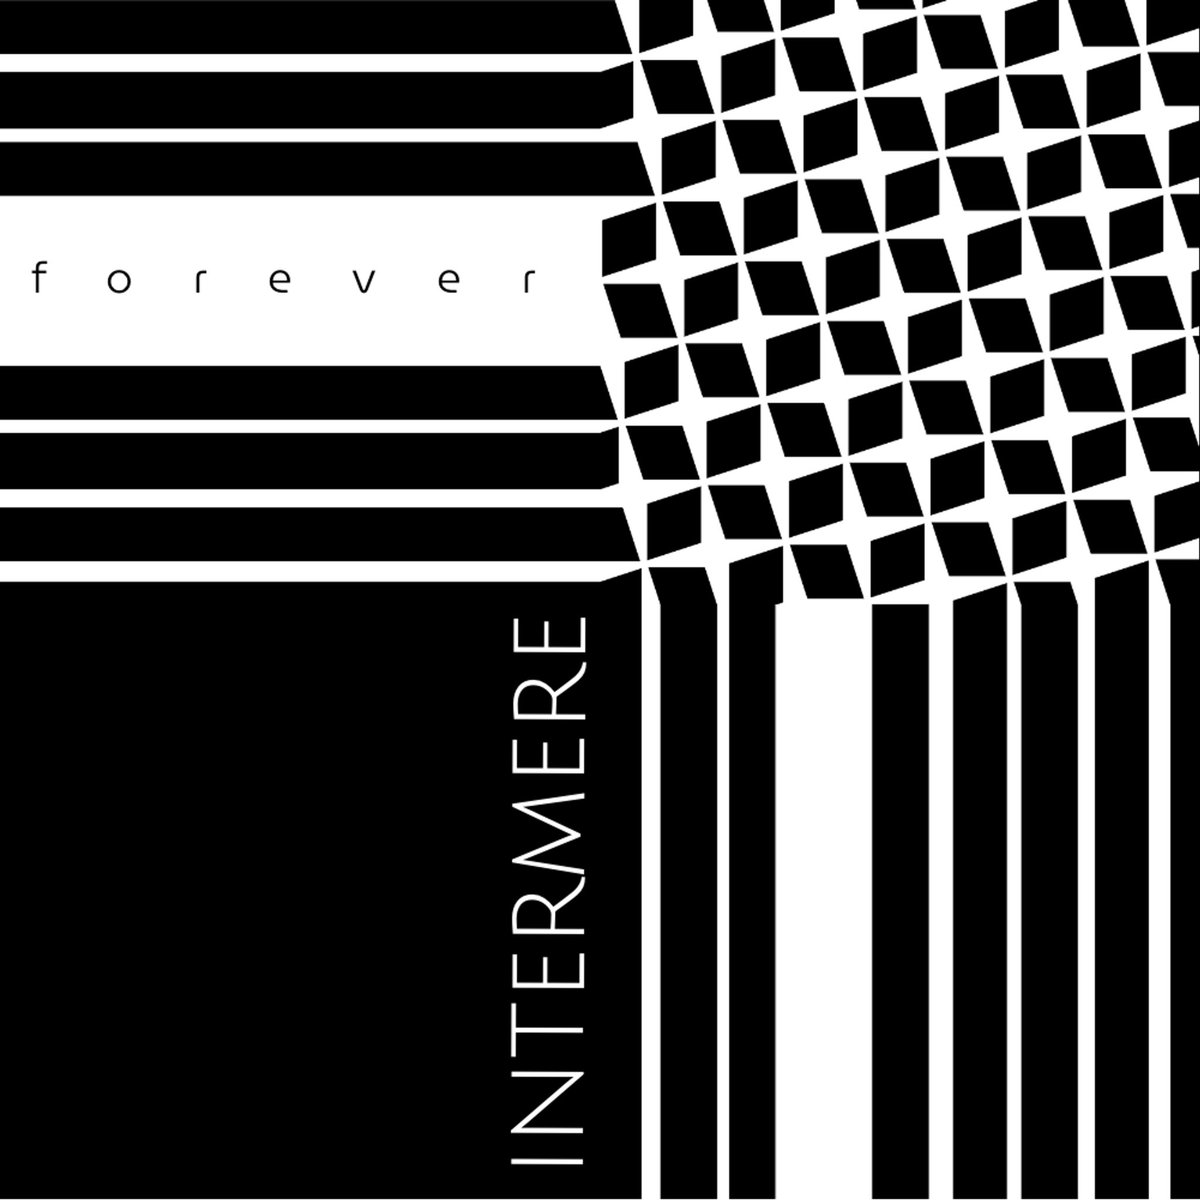 Today we release our second INTERMERE single, called “Forever”, 5 years after the first. We’re slow, like the music
#shoegaze #slowgaze #slowcore #etherial #reverb #newmusic #newmusicreleases